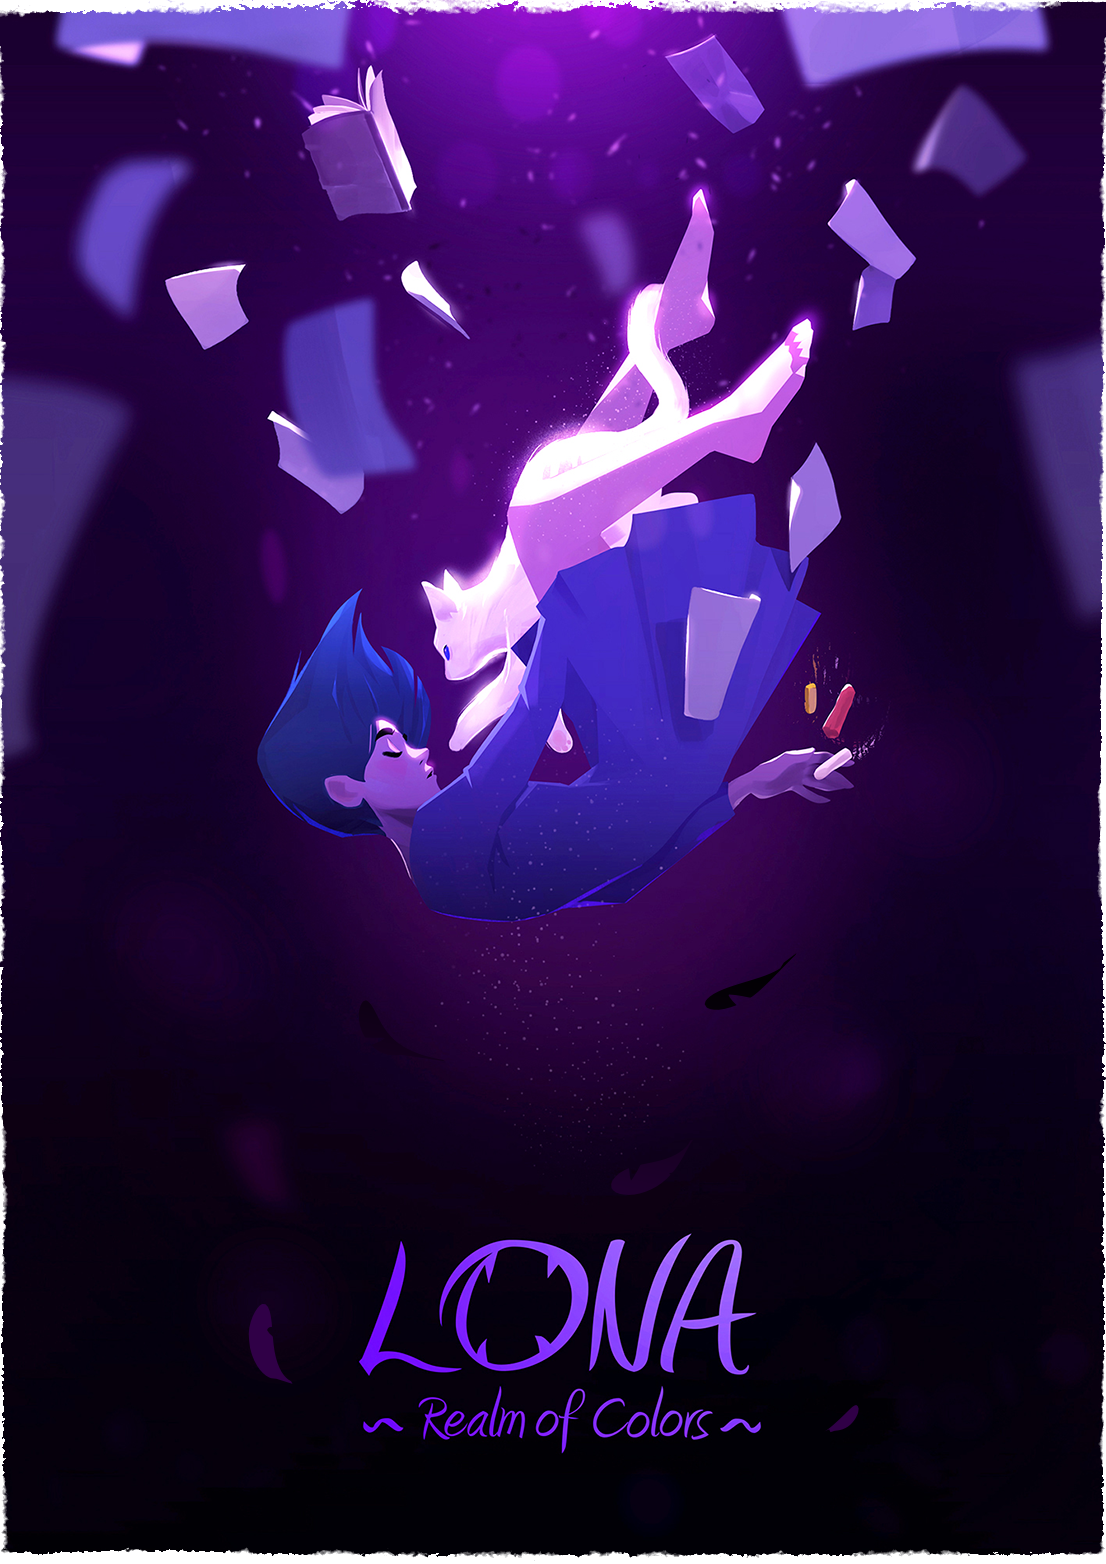 Lona Realm of Colors Free